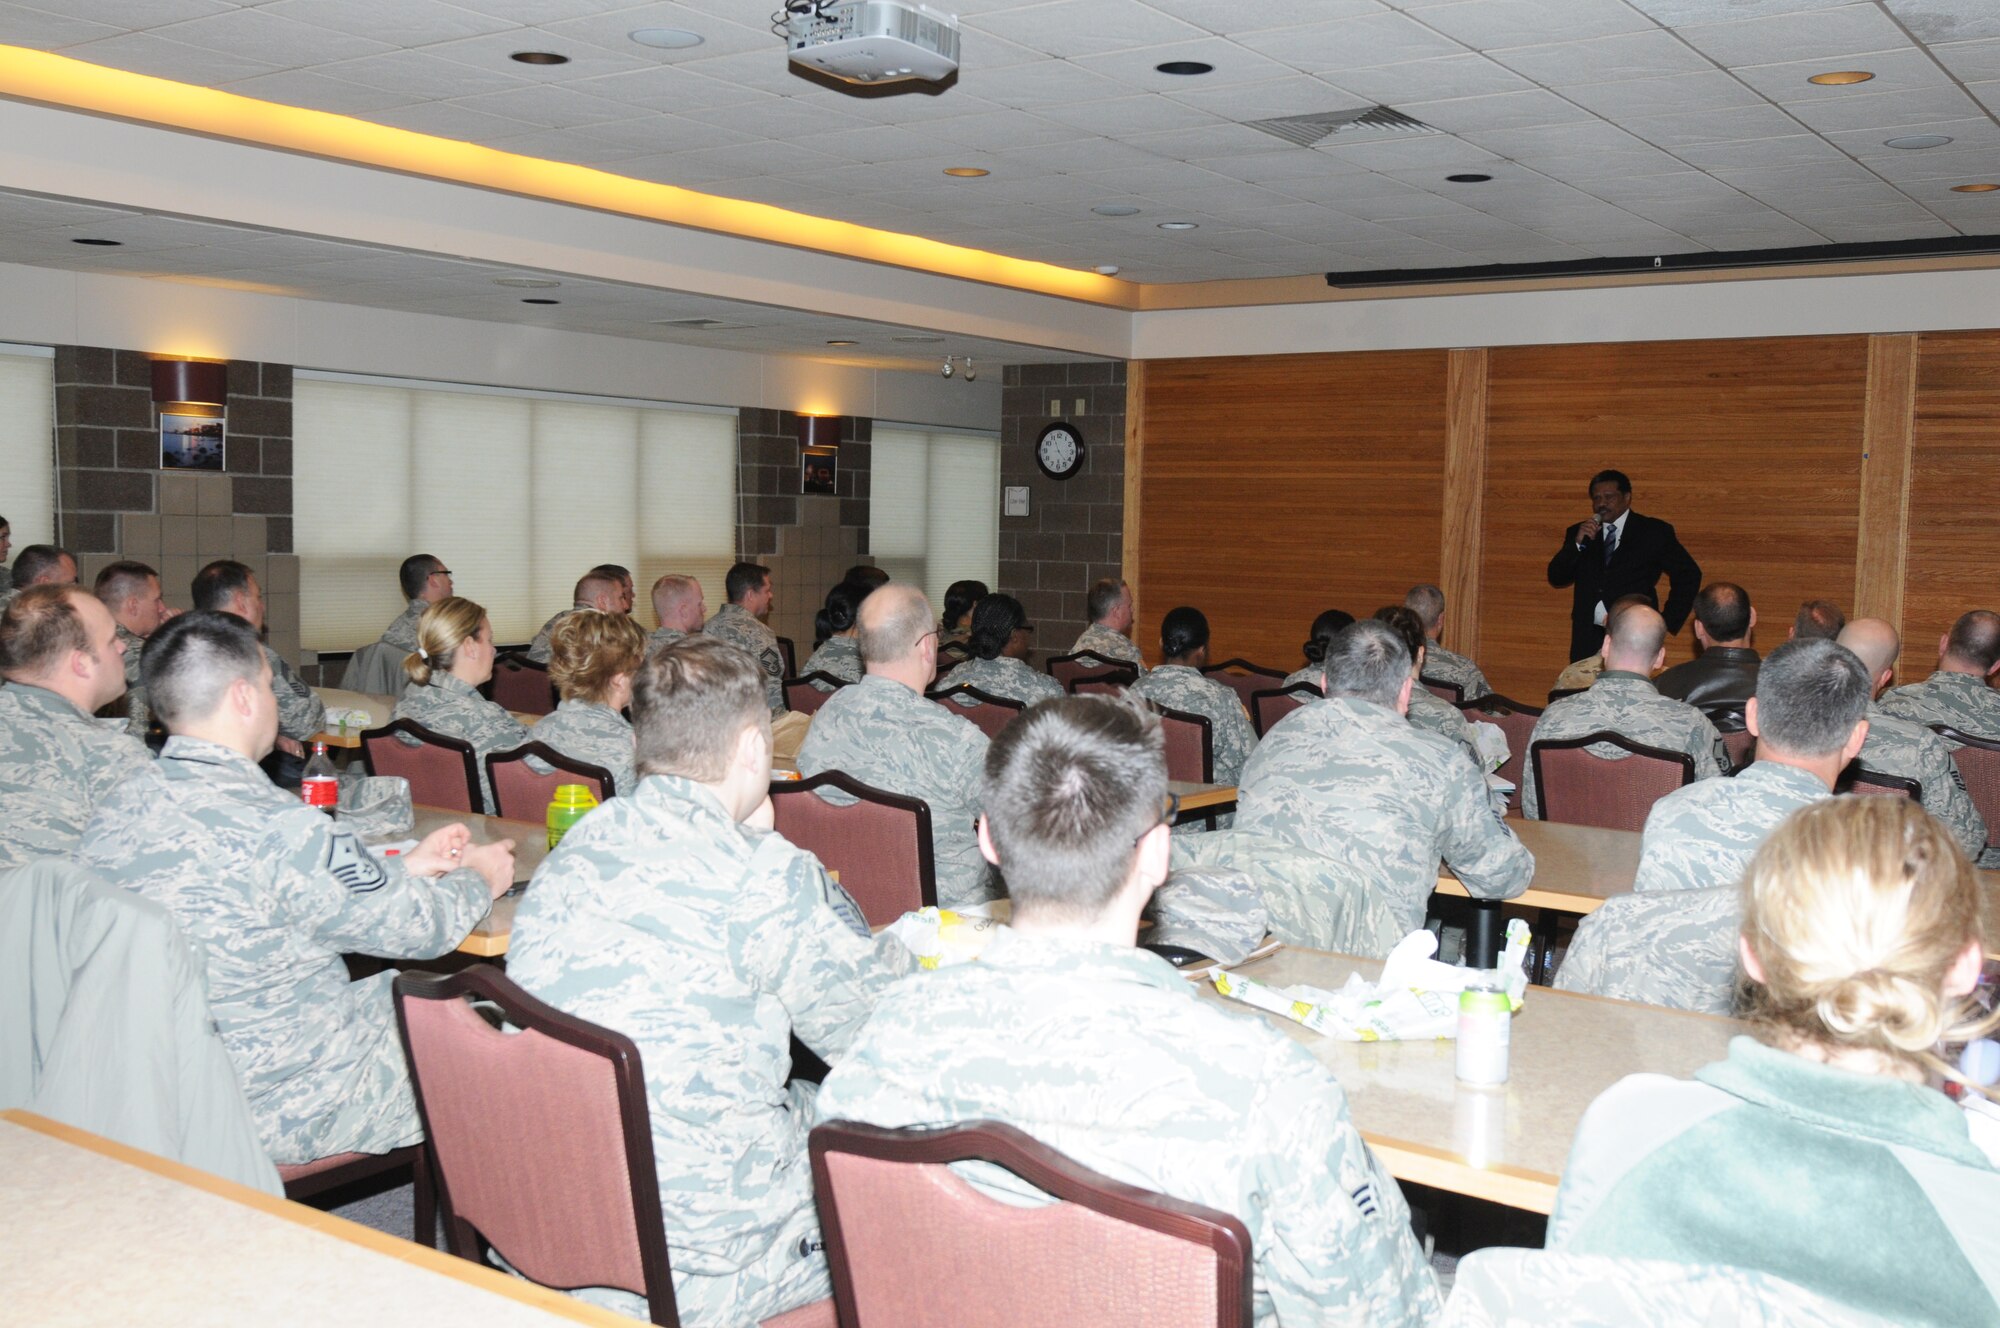 Pastor Billy G. Russell, Senior Pastor of Greater Friendship Missionary Baptist Church, Minneapolis, Minn., shares remarks with members of the Minnesota National Guard while in Duluth, Minn., on Feb. 5, 2016.  Russell was at the 148th Fighter Wing to share his experiences about the hardships he encountered growing up during racial segregation and to talk about the importance of diversity.  (U.S. Air National Guard photo by Master Sgt. Ralph Kapustka)